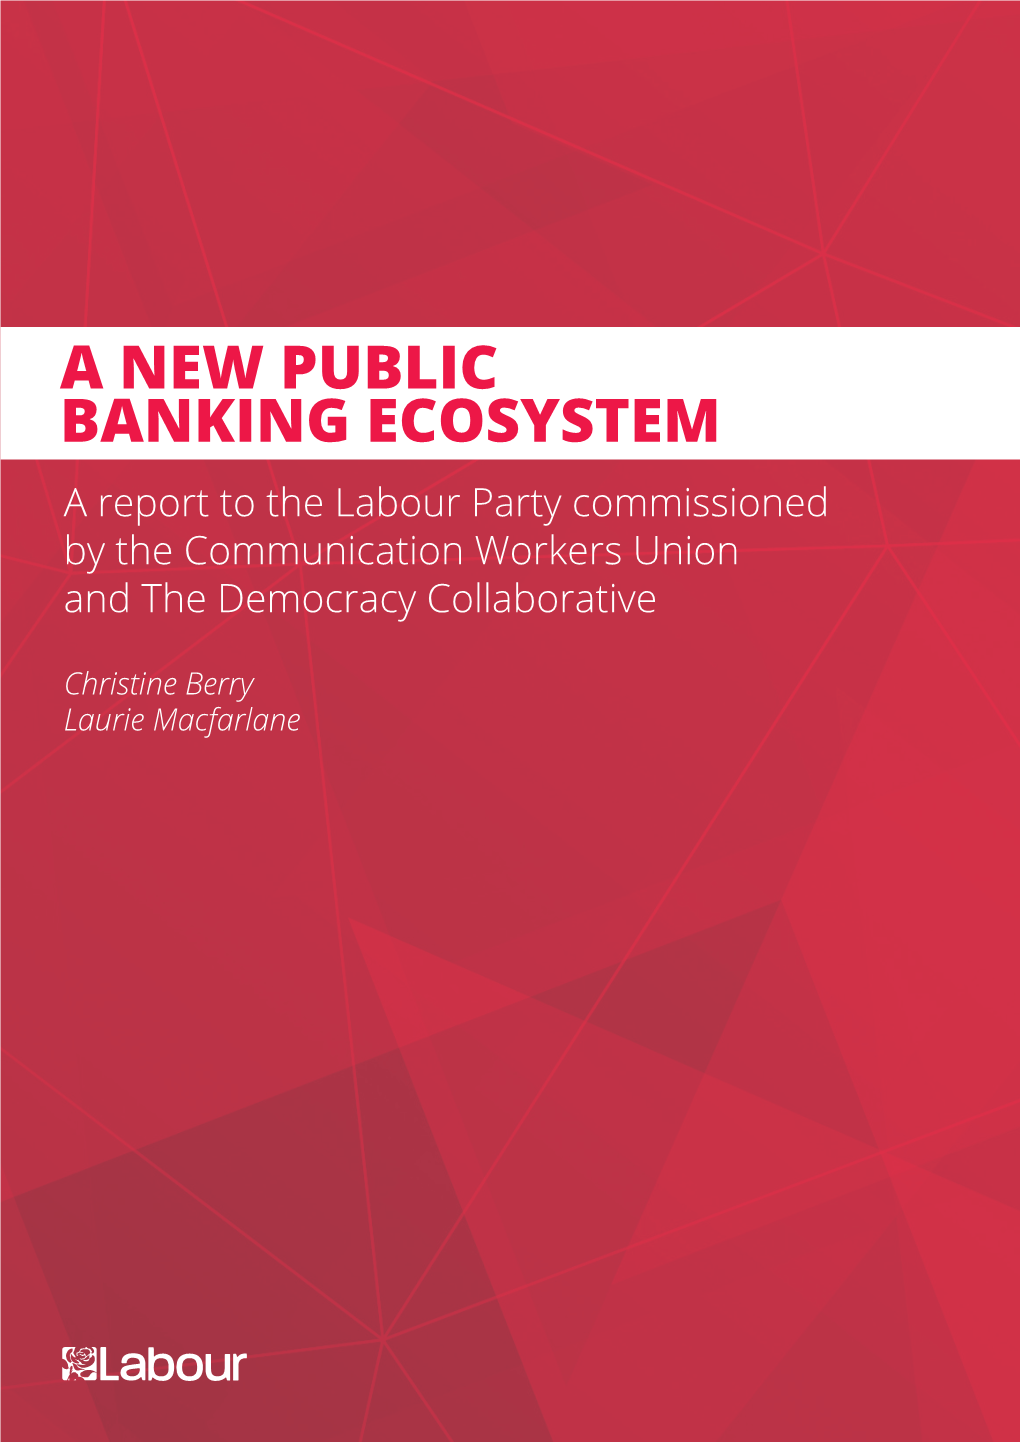 Building a New Public Banking Ecosystem 4 1 Introduction and Summary of Recommendations